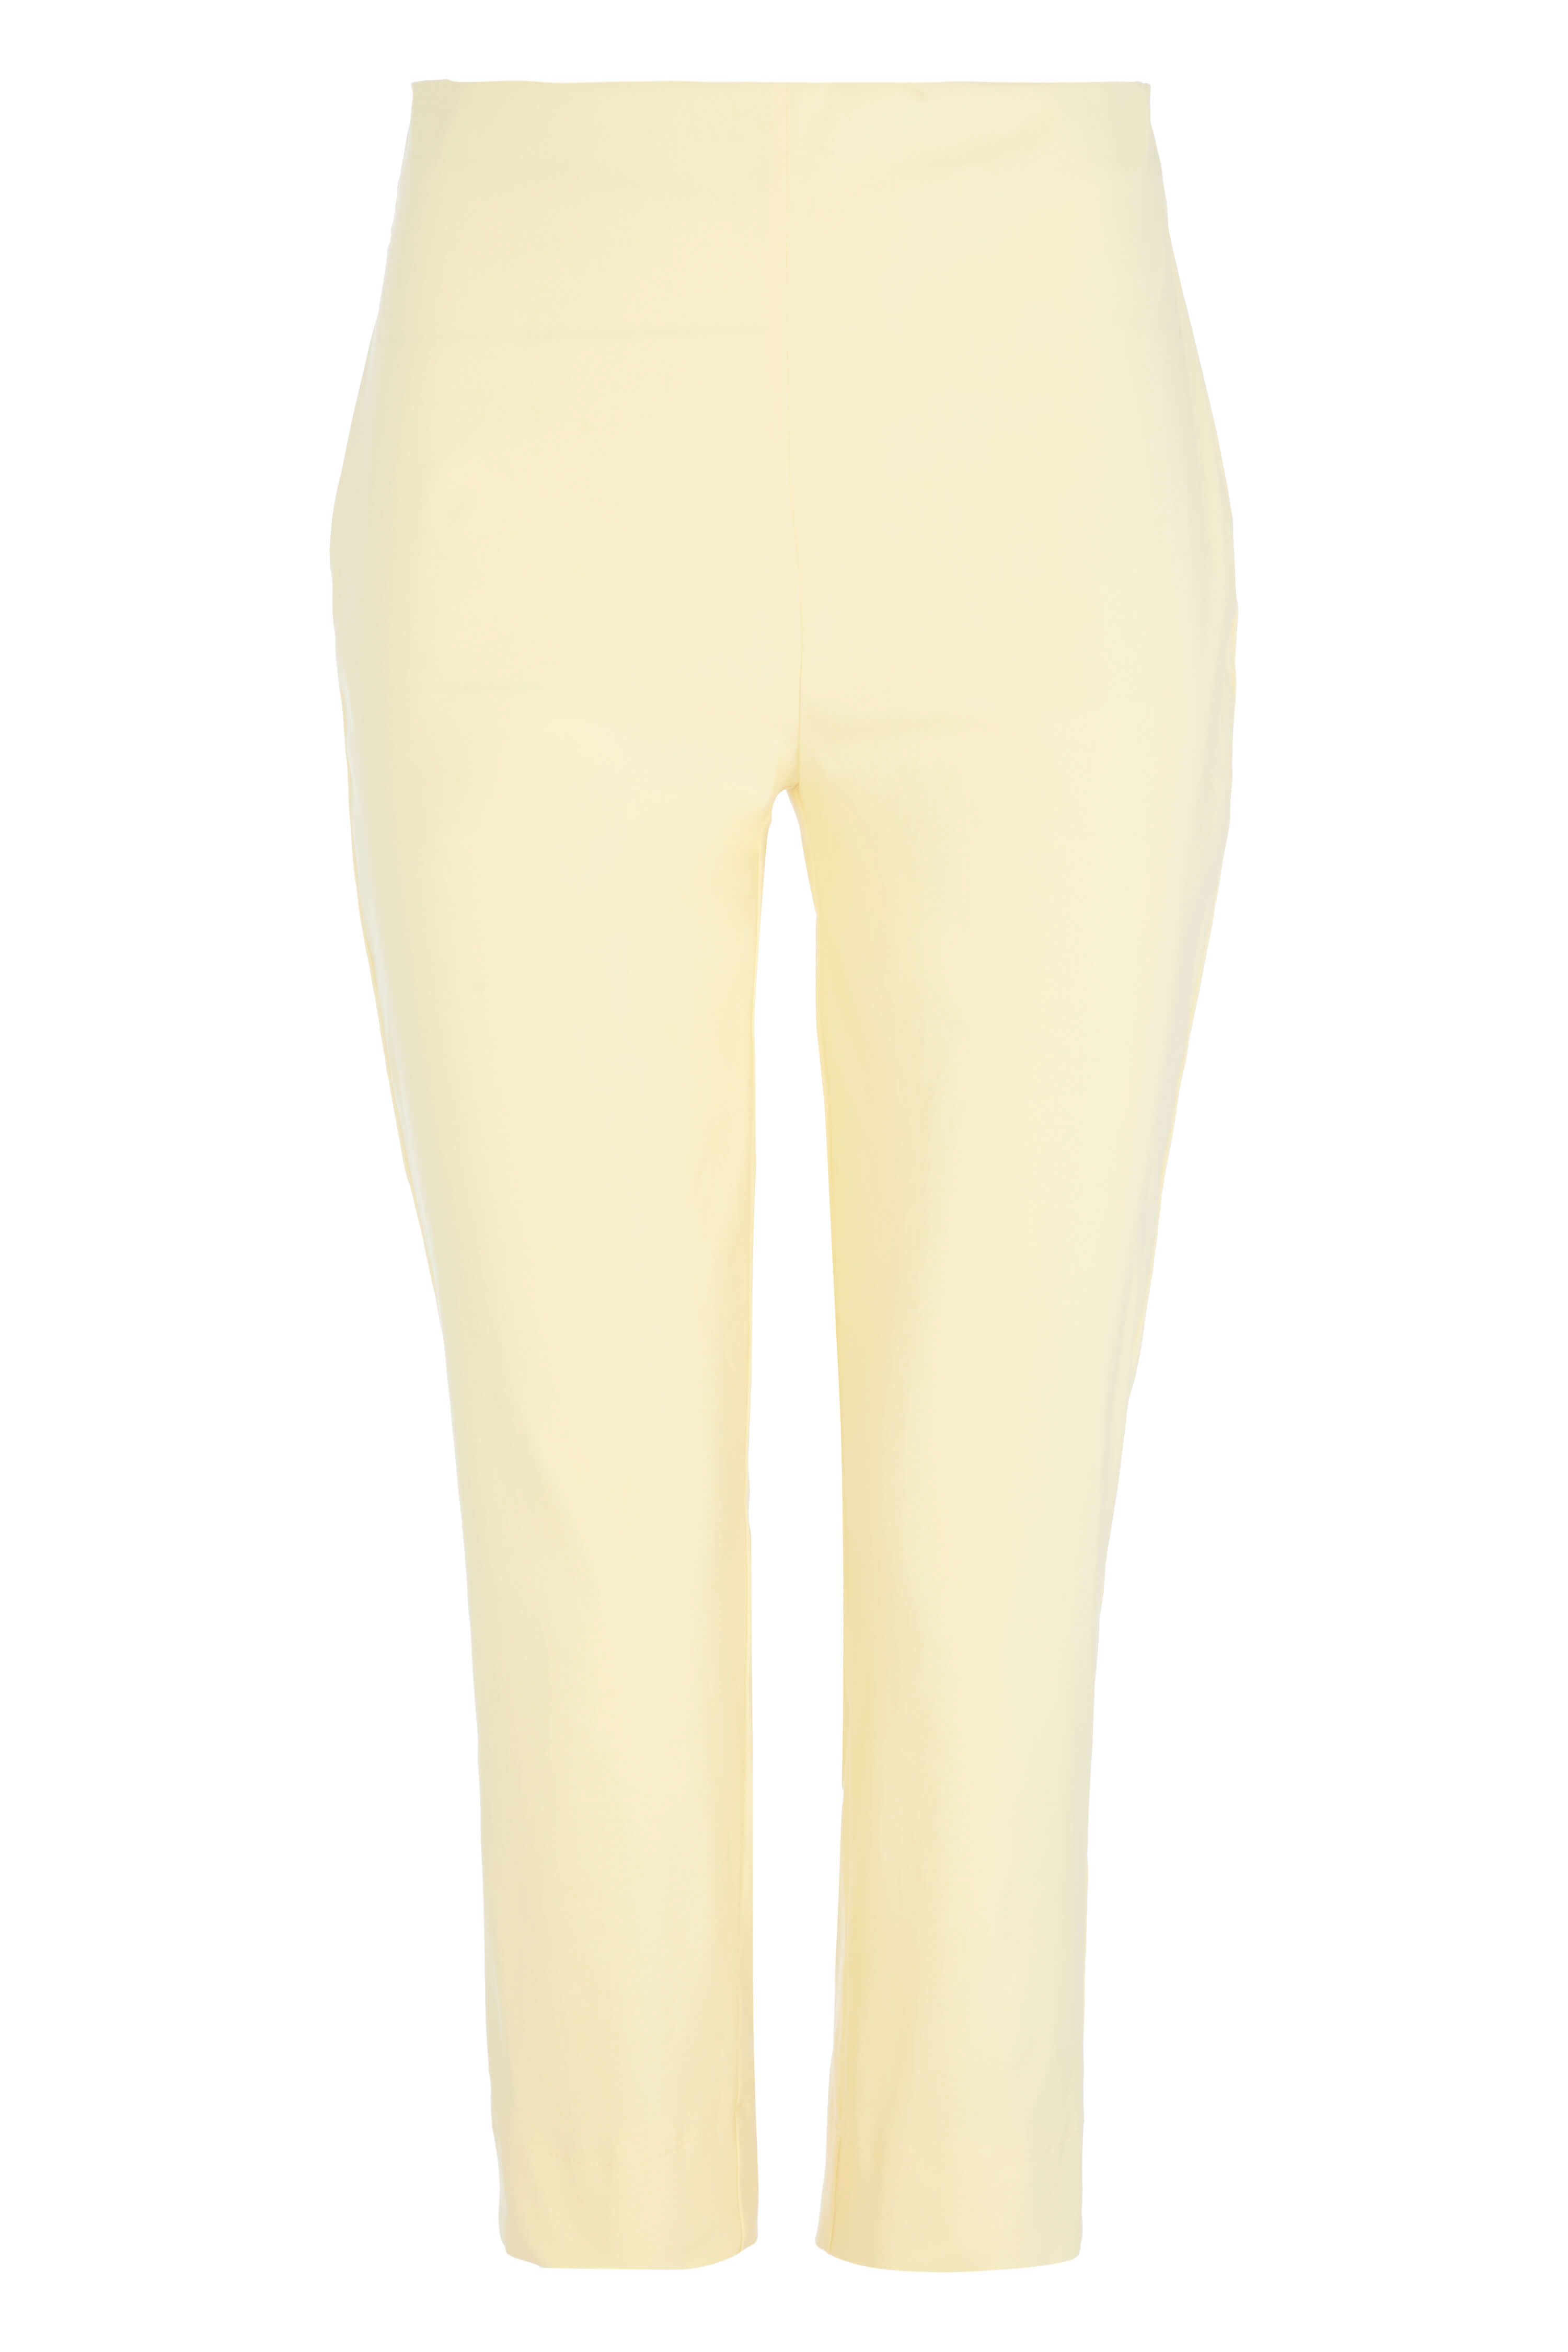 Lemon  Cropped Stretch Trouser, Image 4 of 4